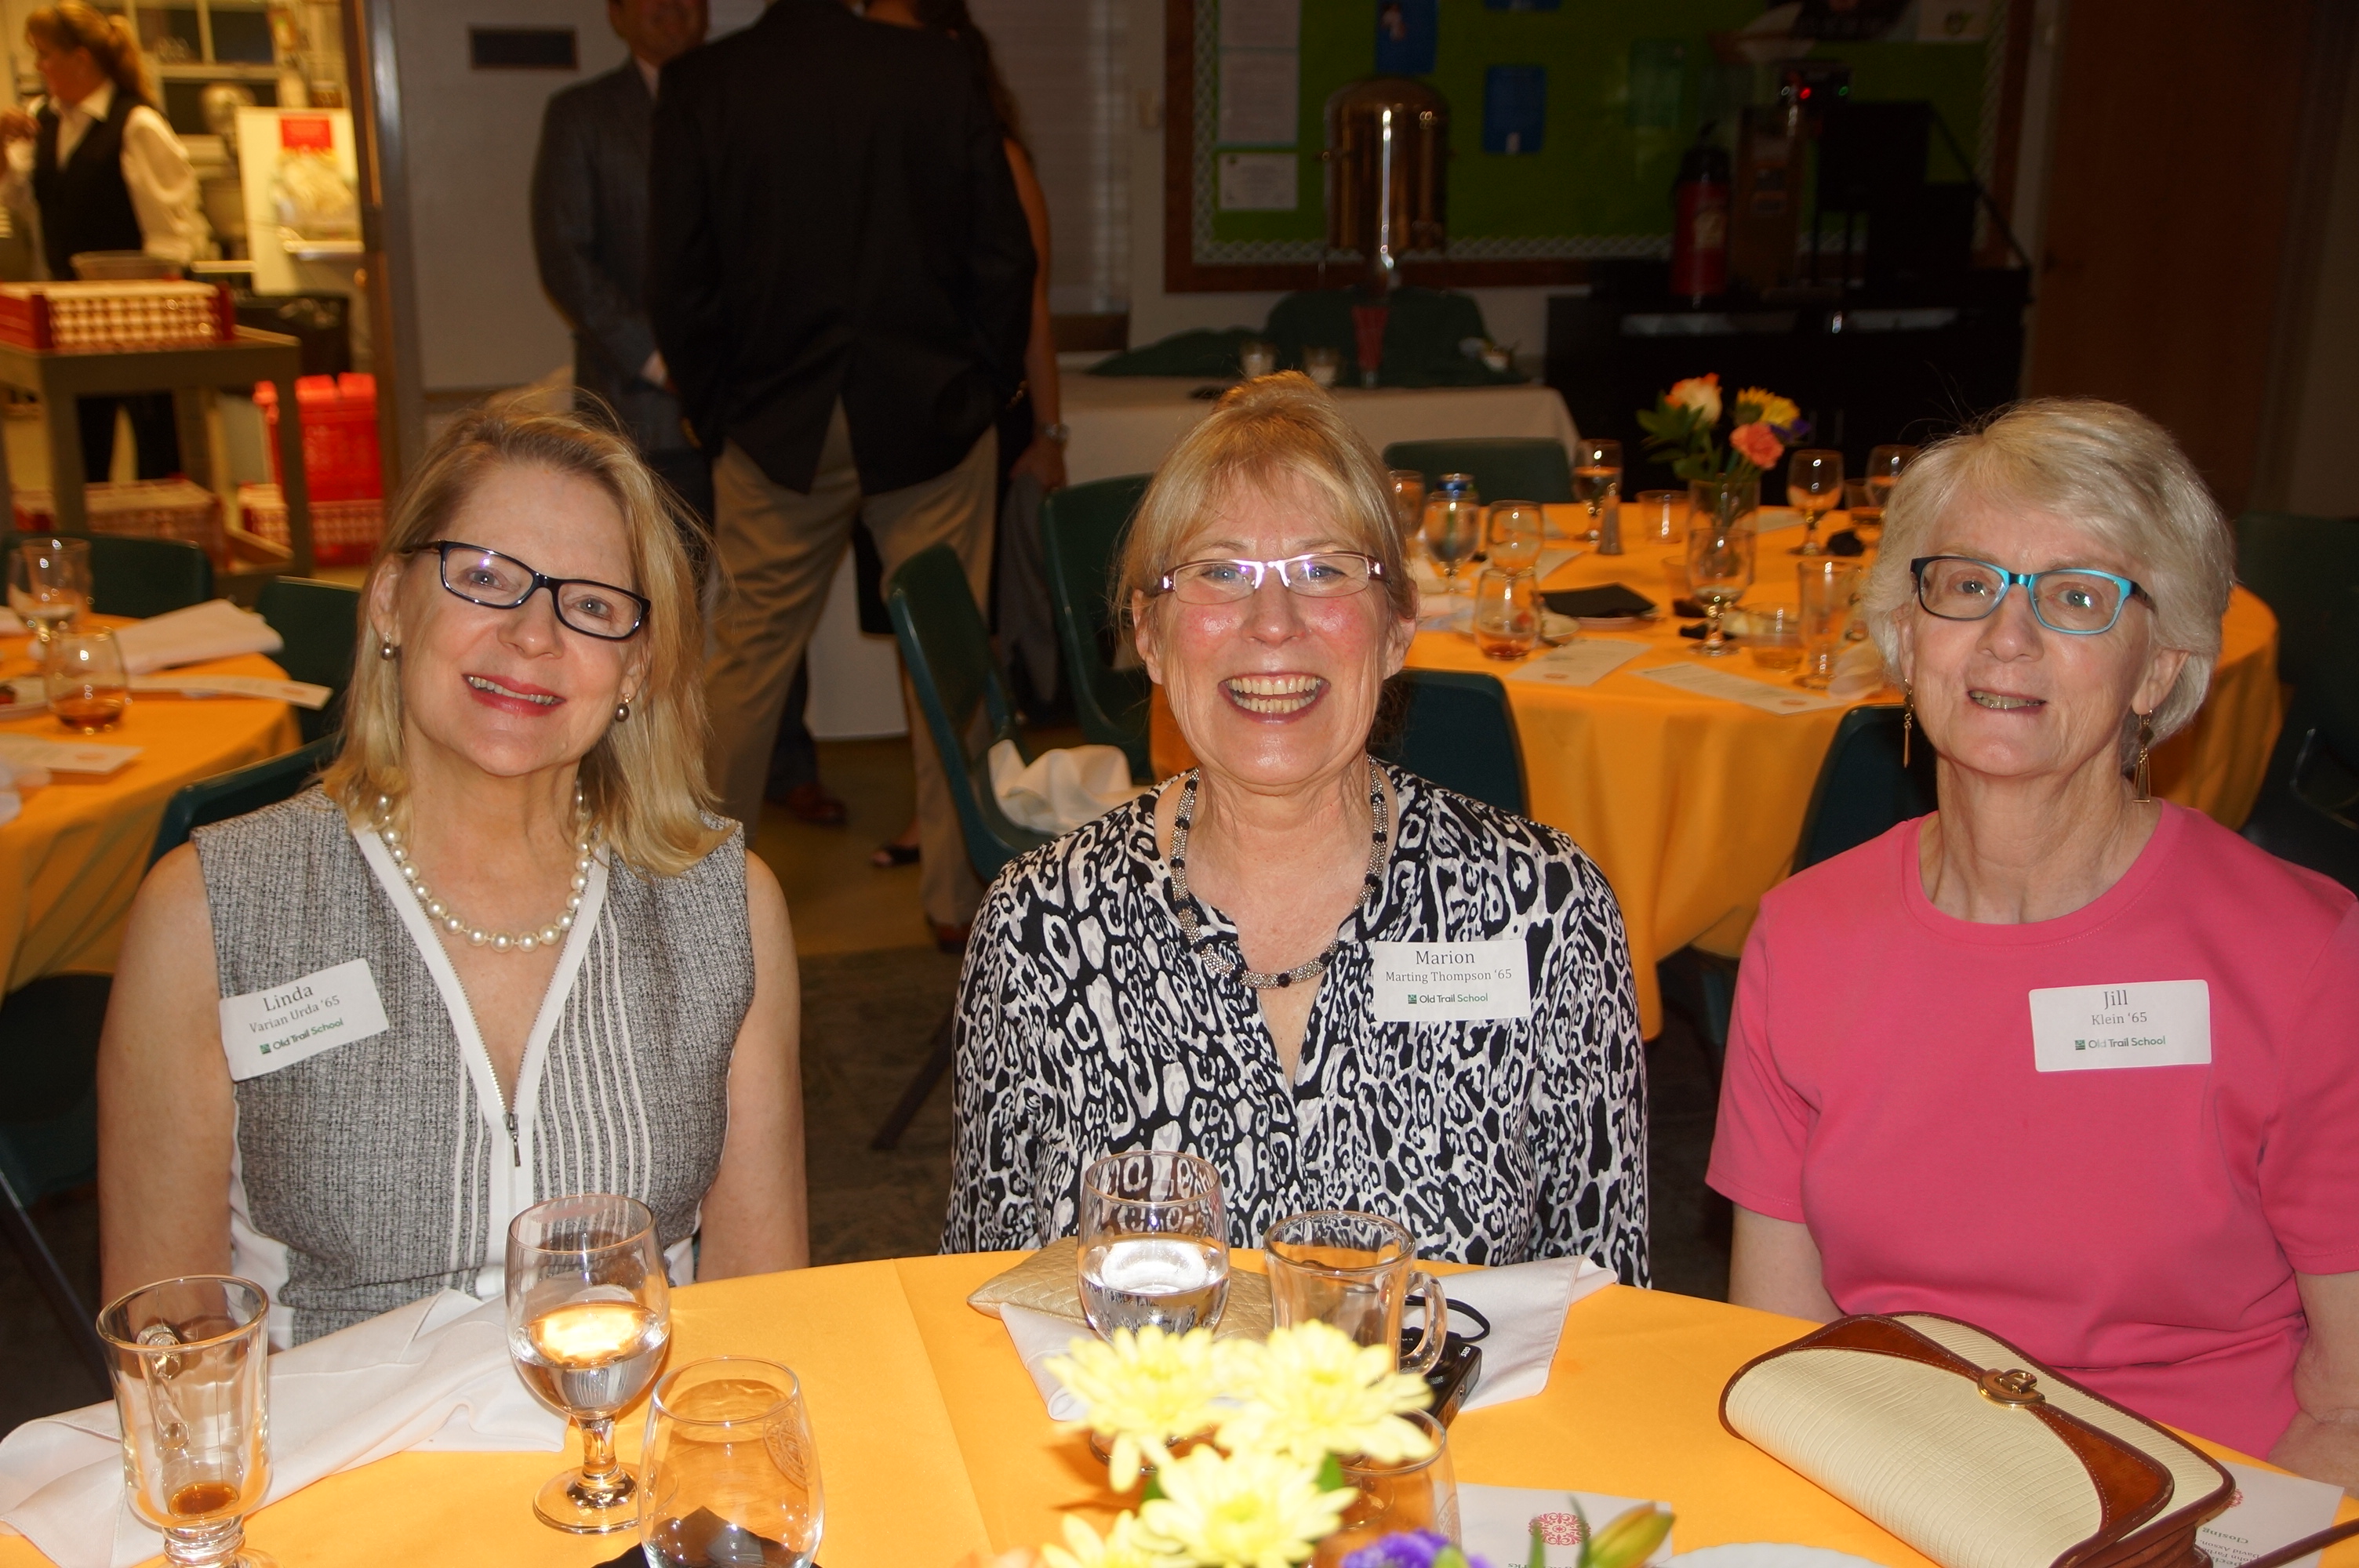 Class of 1965 (L-R):Linda Gale Urda, Marion Marting Thompson and Jill Klein